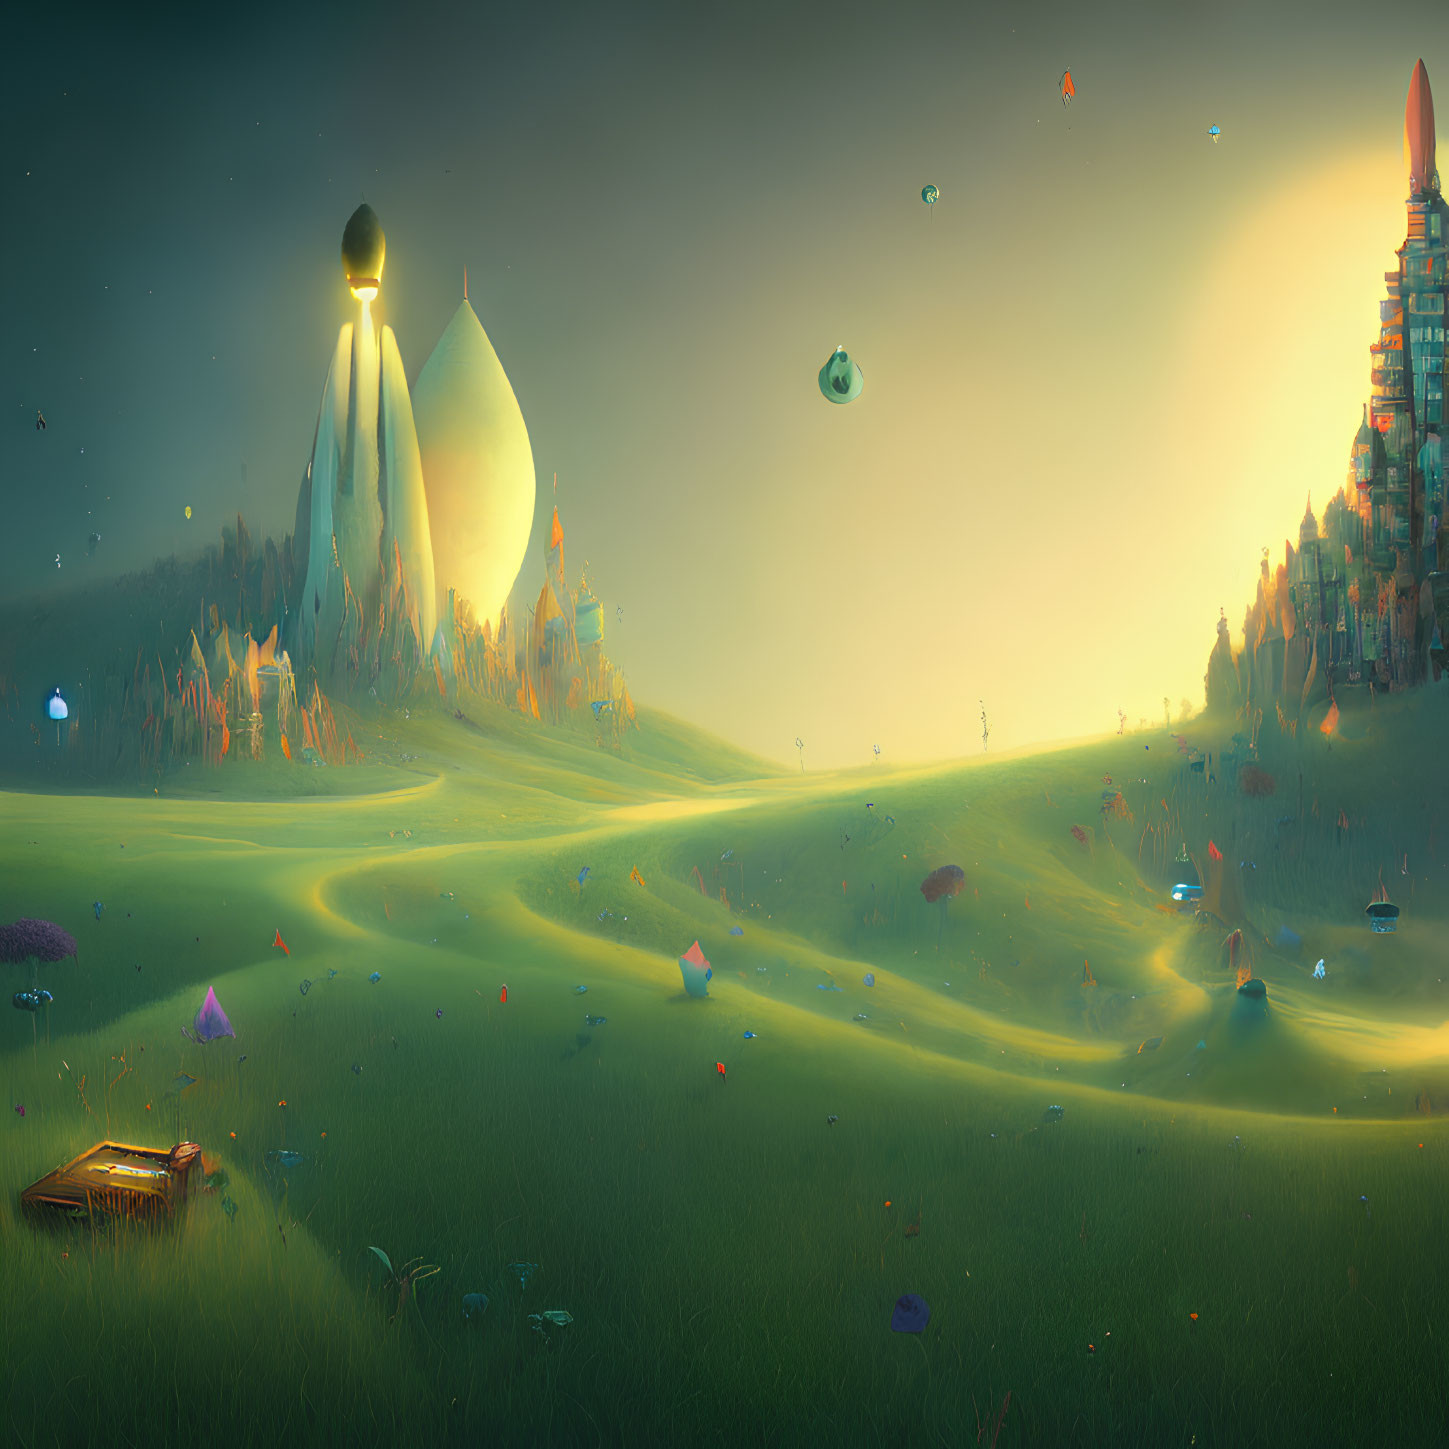 Golden fantasy landscape with futuristic buildings and floating islands